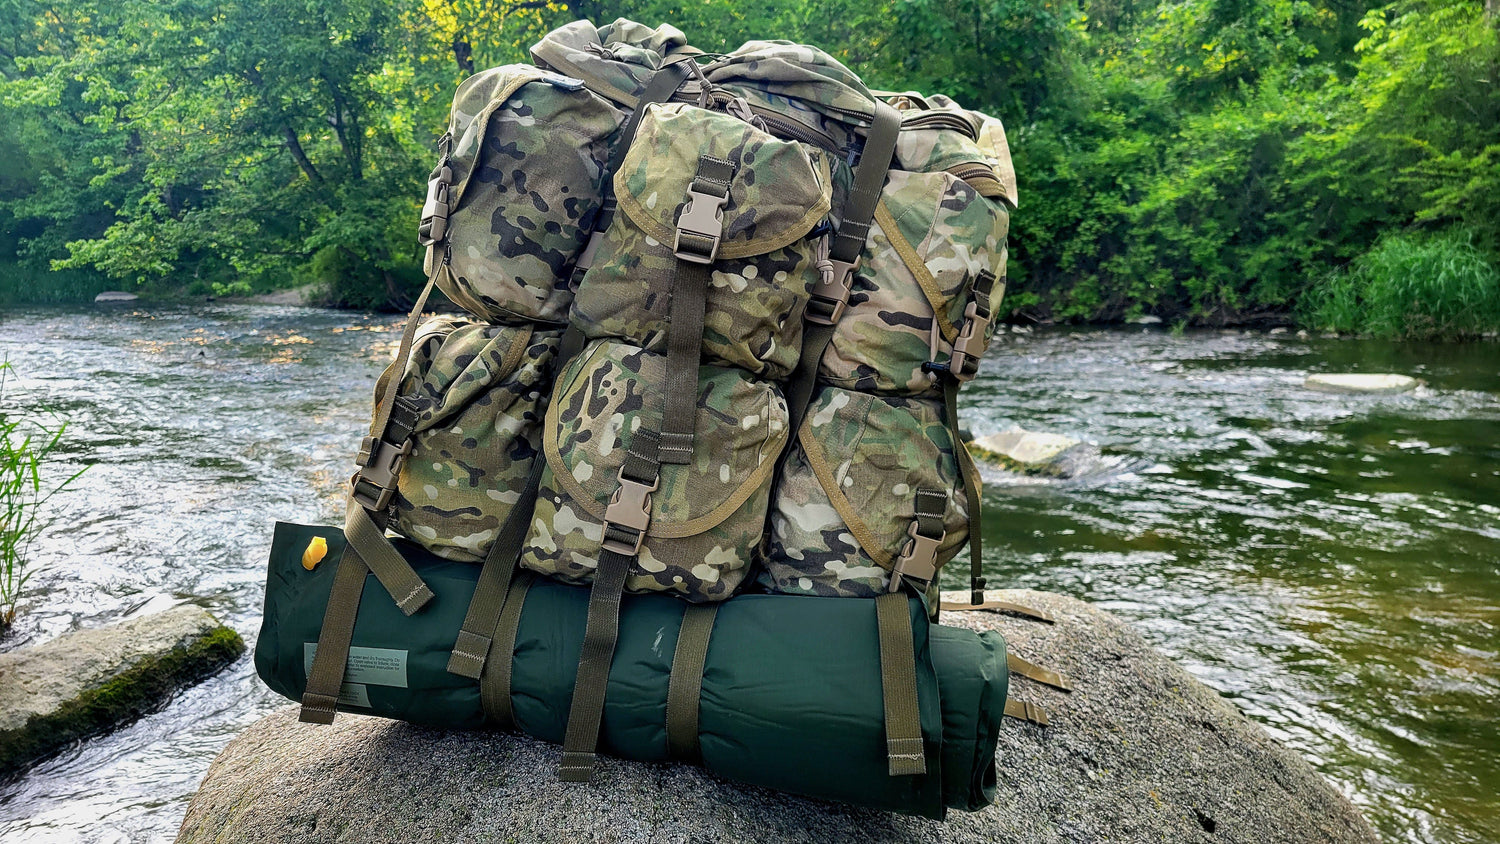 London Bridge Trading 2657: The Ultimate Tactical Companion for Outdoor Adventures